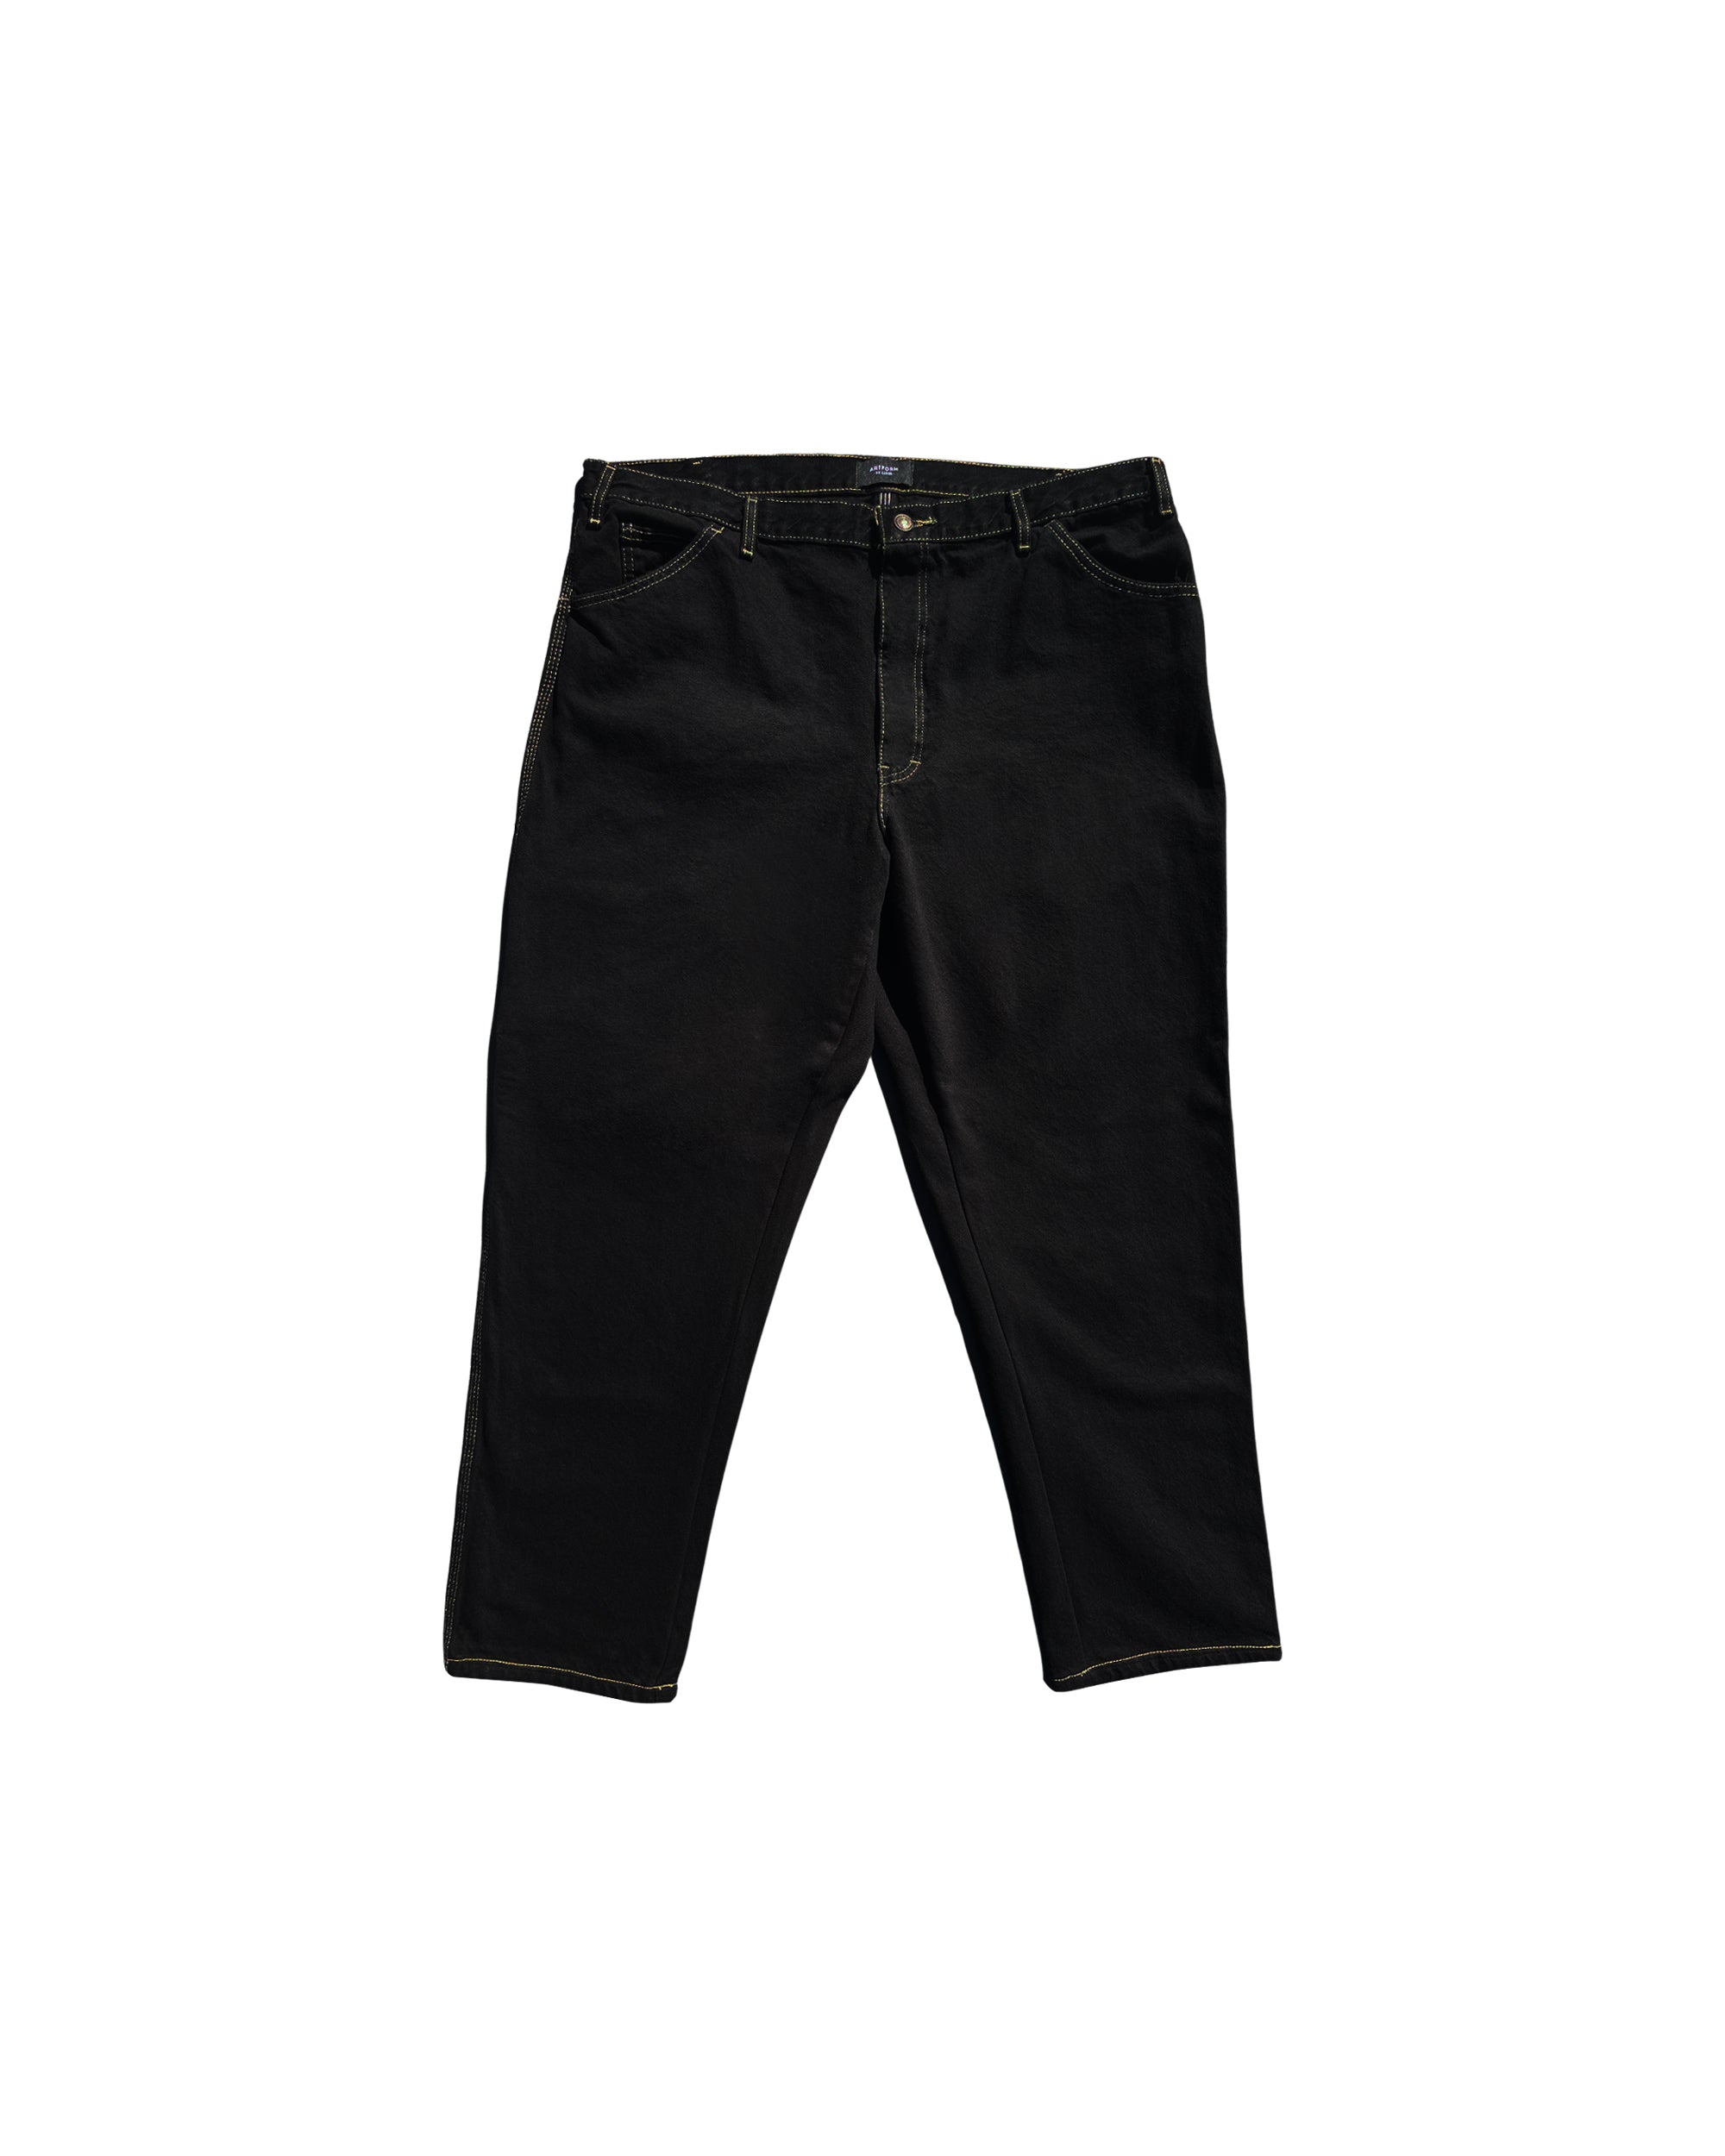 Denim Carpenter Pants 1AFADC, Black, Contact Seller for Other Sizes